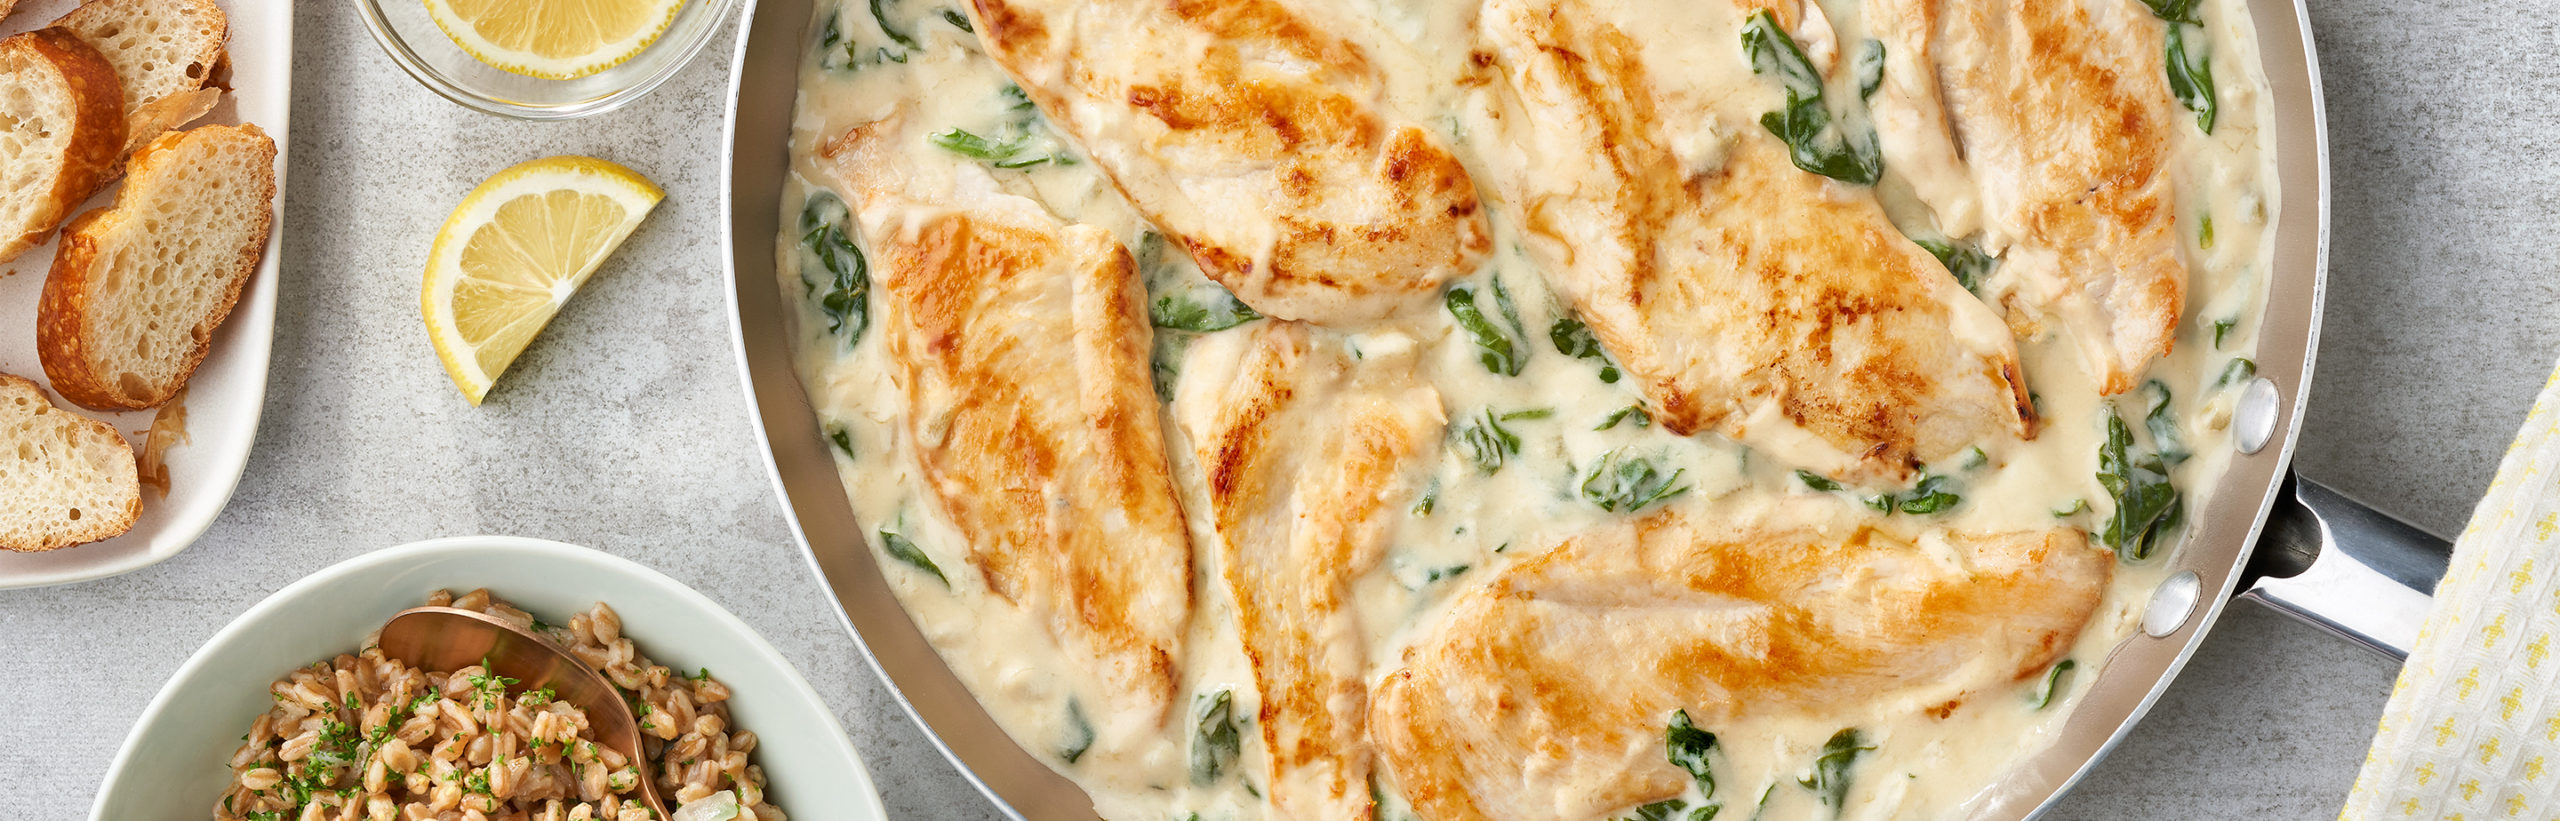 Healthy Lemon Chicken Scallopini with Spinach - Campbell Soup Company